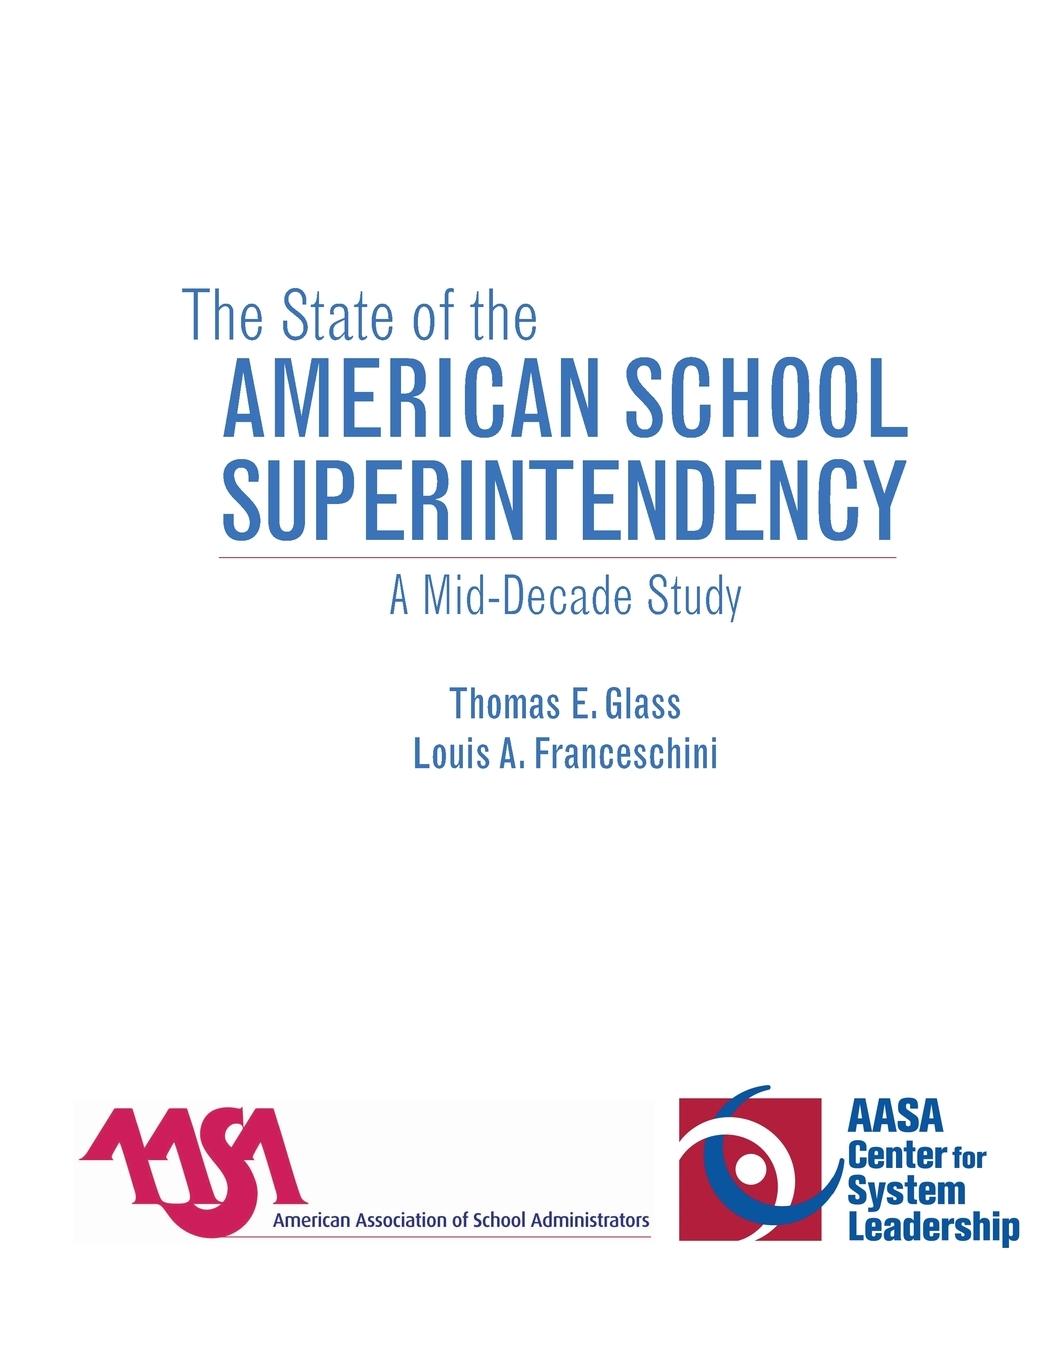 The State of the American School Superintendency - Glass, Thomas E. Franceschini, Louis A.